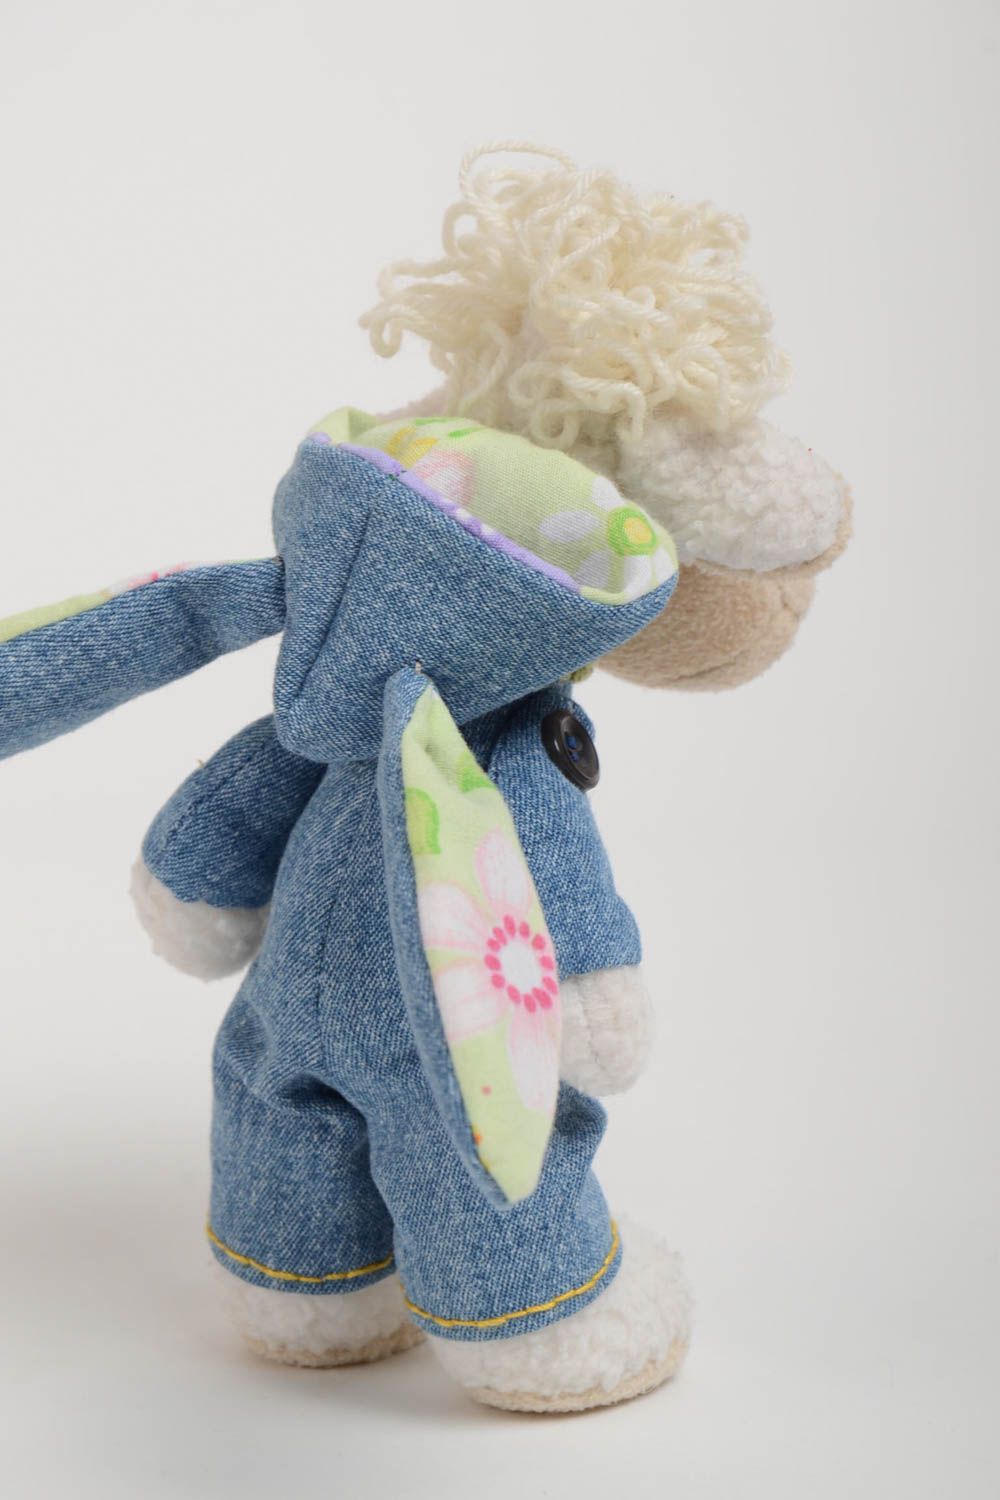 Small handmade soft toy made of felt and jeans unusual for kids photo 4